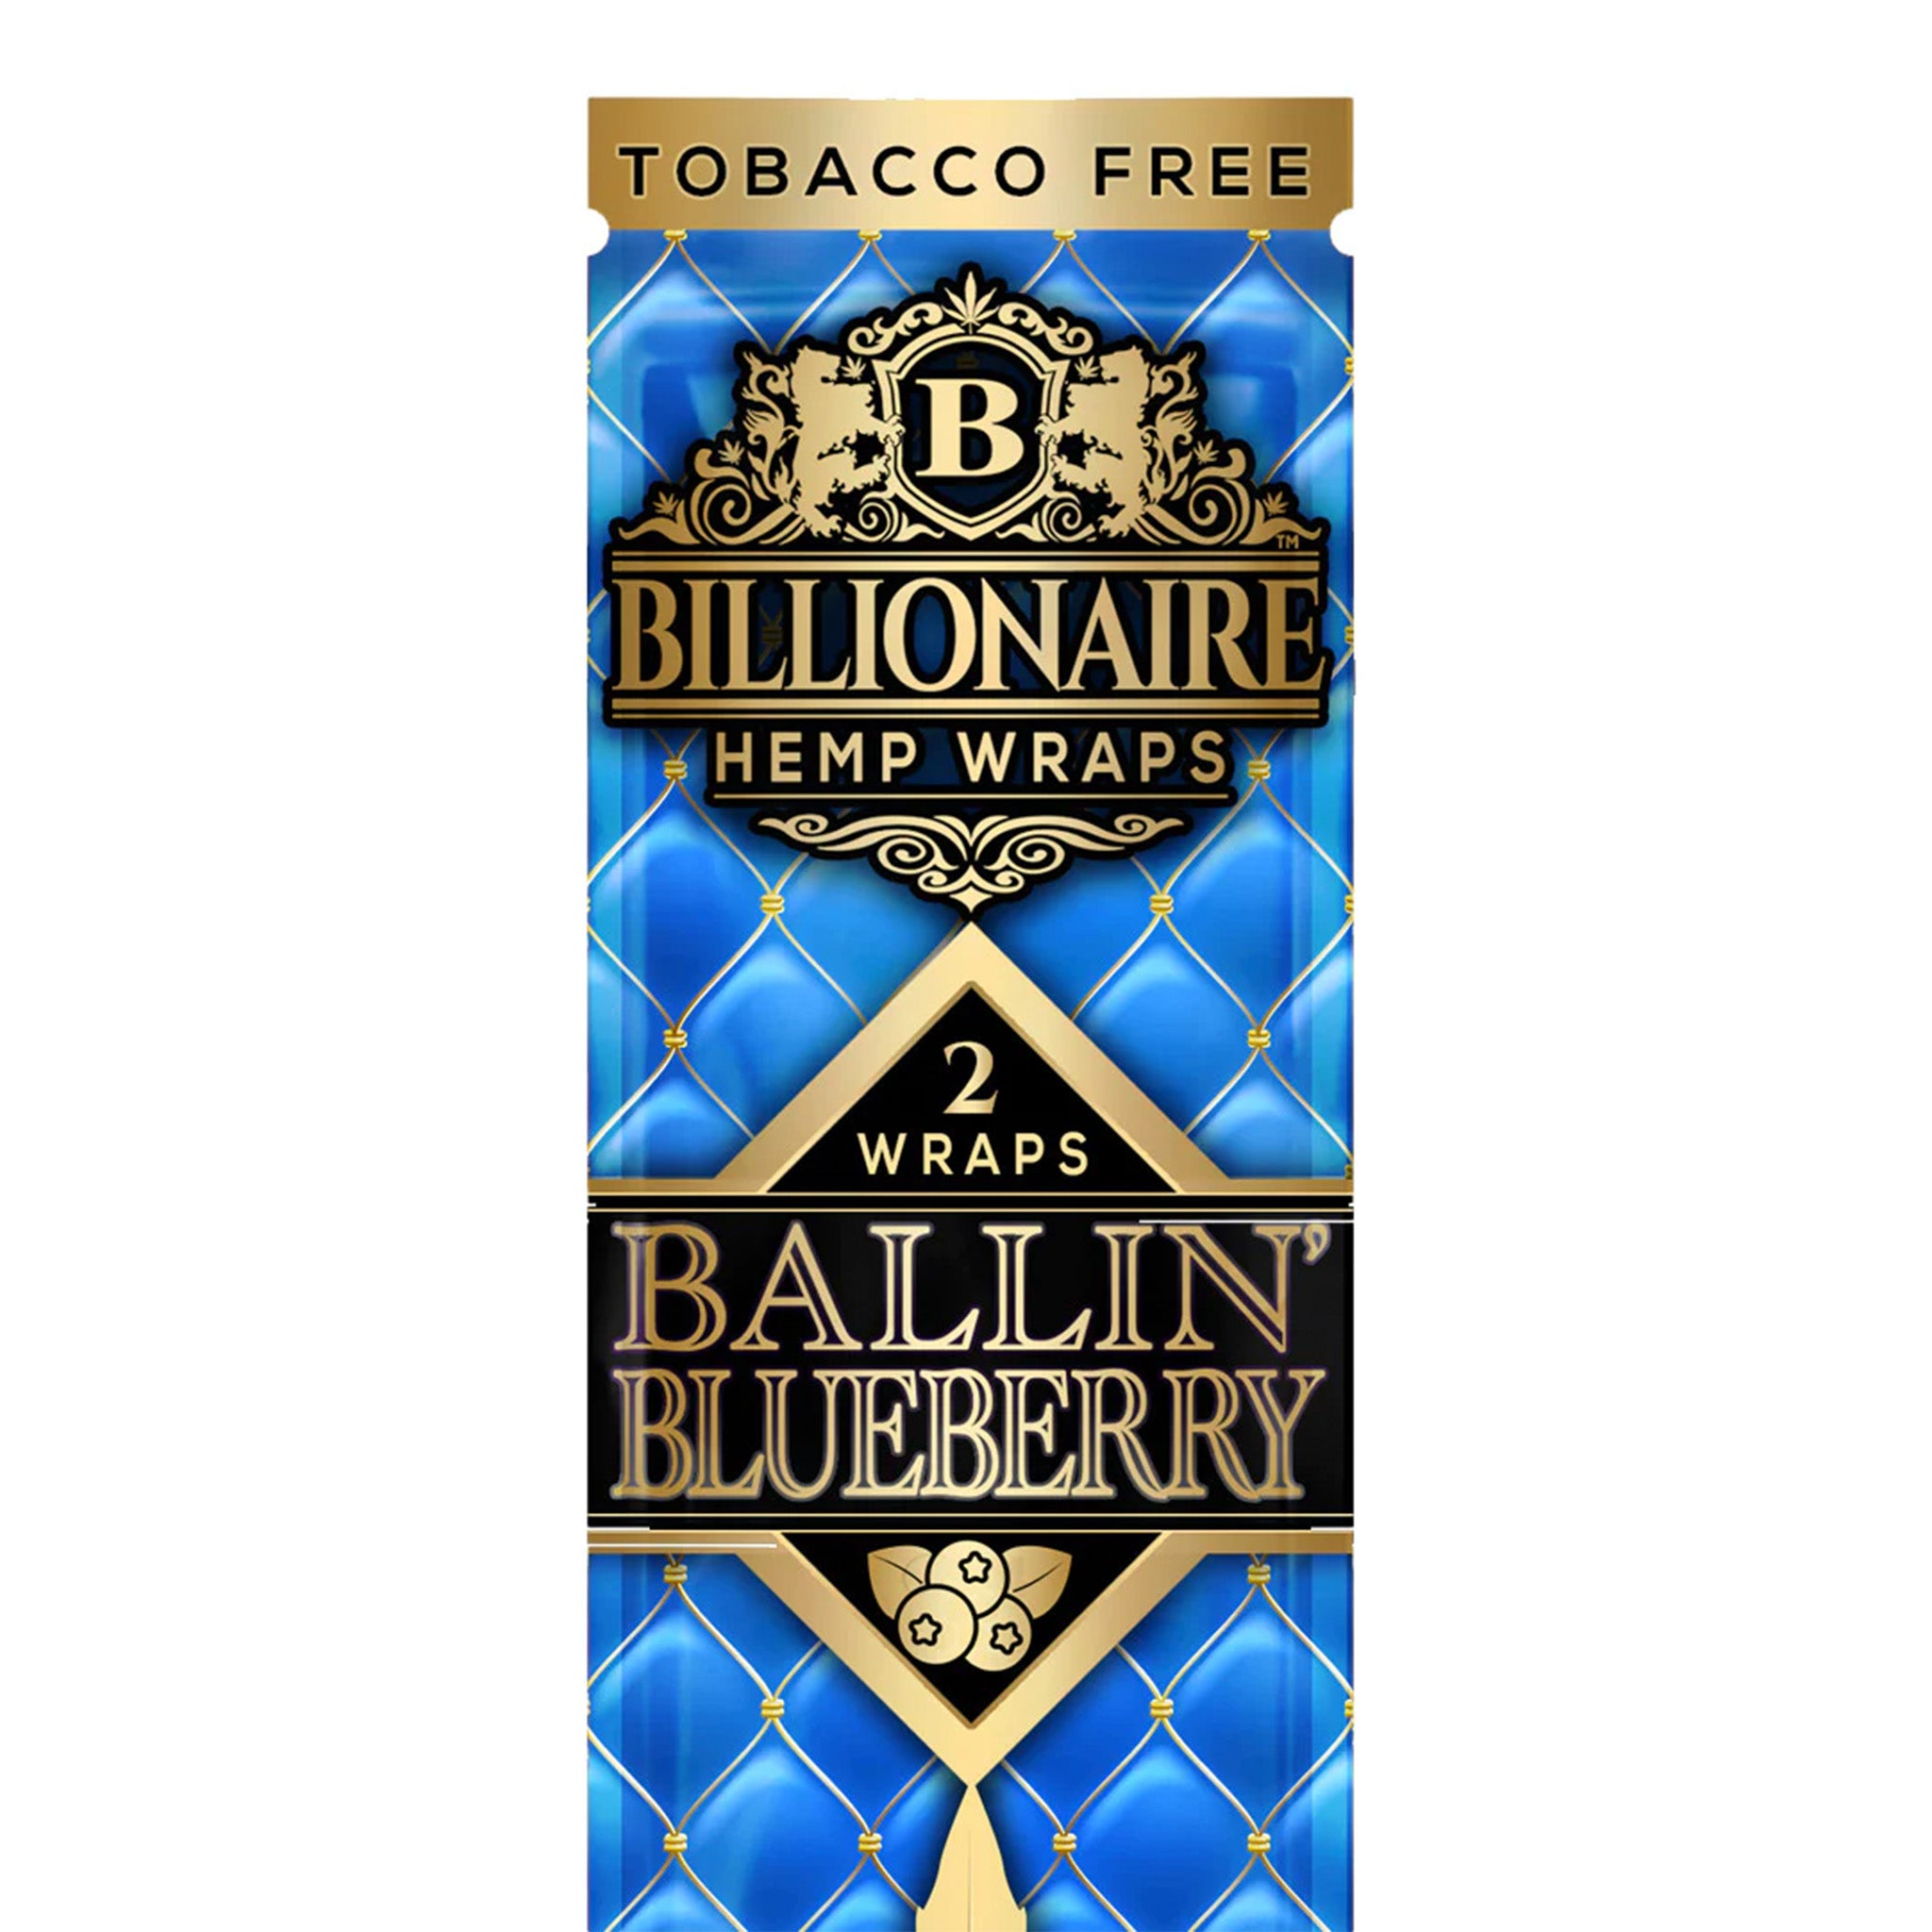 Billionaire Hemp Wraps - Two Packs Rolling Papers Ultimate Brands Ballin' Blueberry 